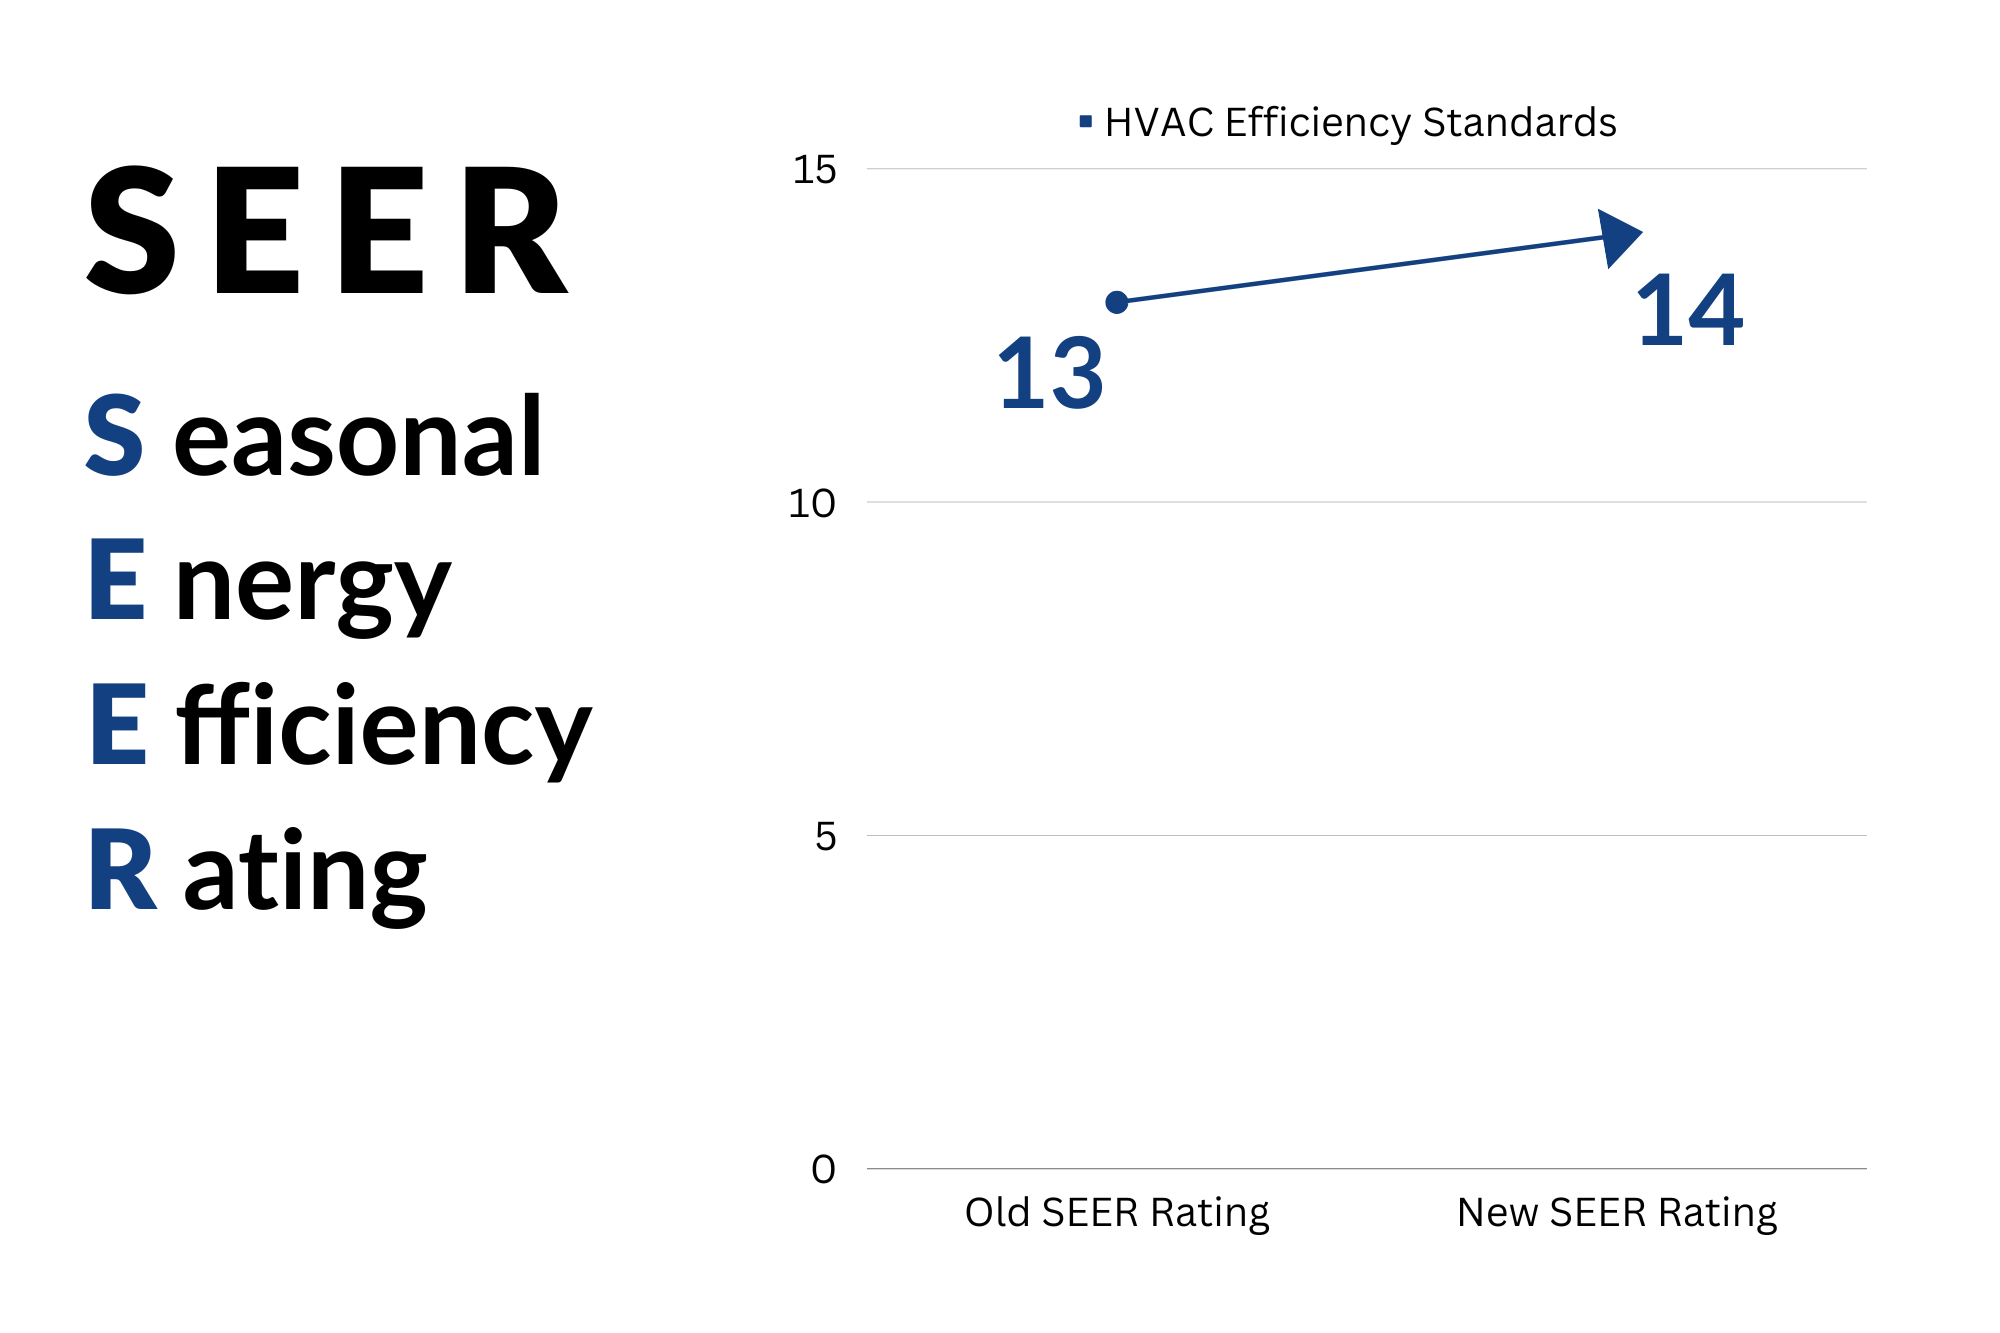 What You Need To Know About The New HVAC Regulations SEER Property